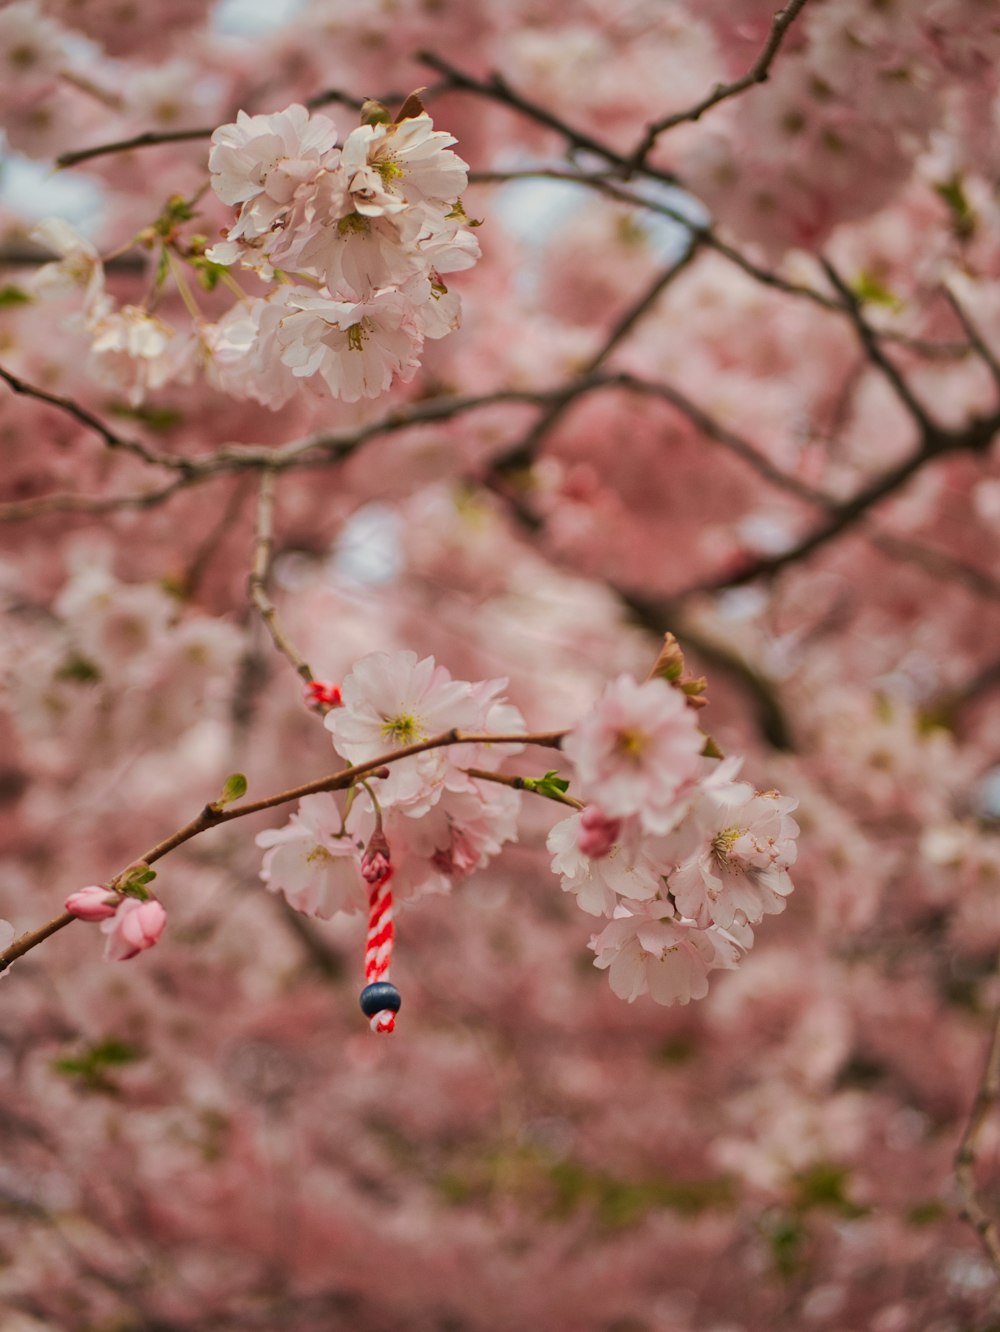 a candy cane hanging from a cherry blossom tree